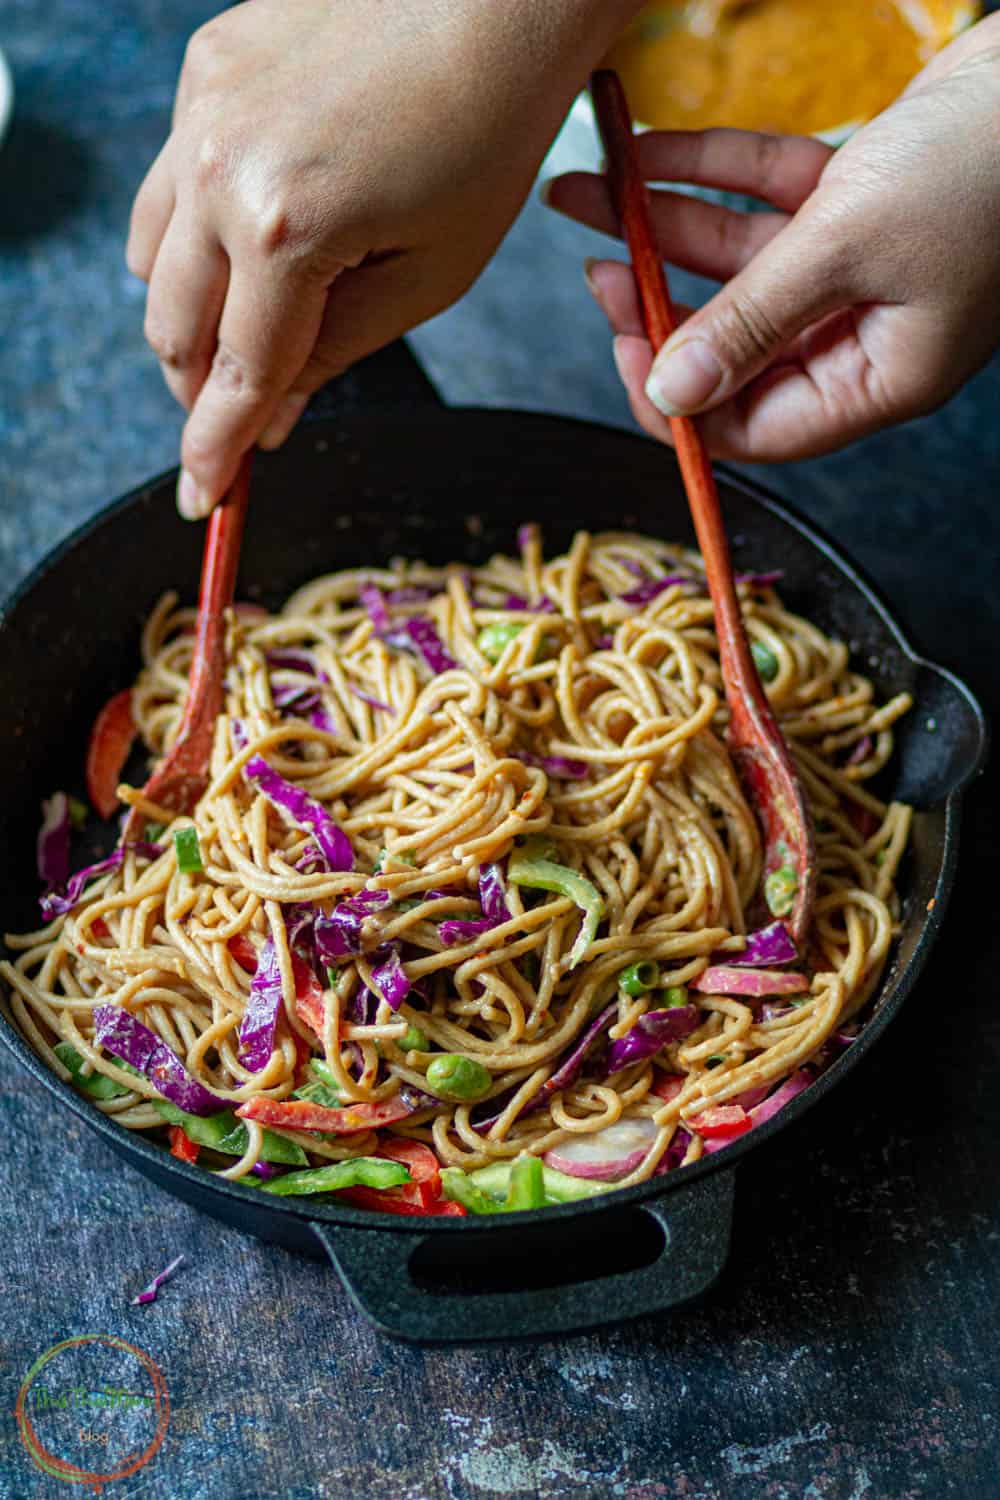 THai Noodle Salad with Peanut Sauce is ready!